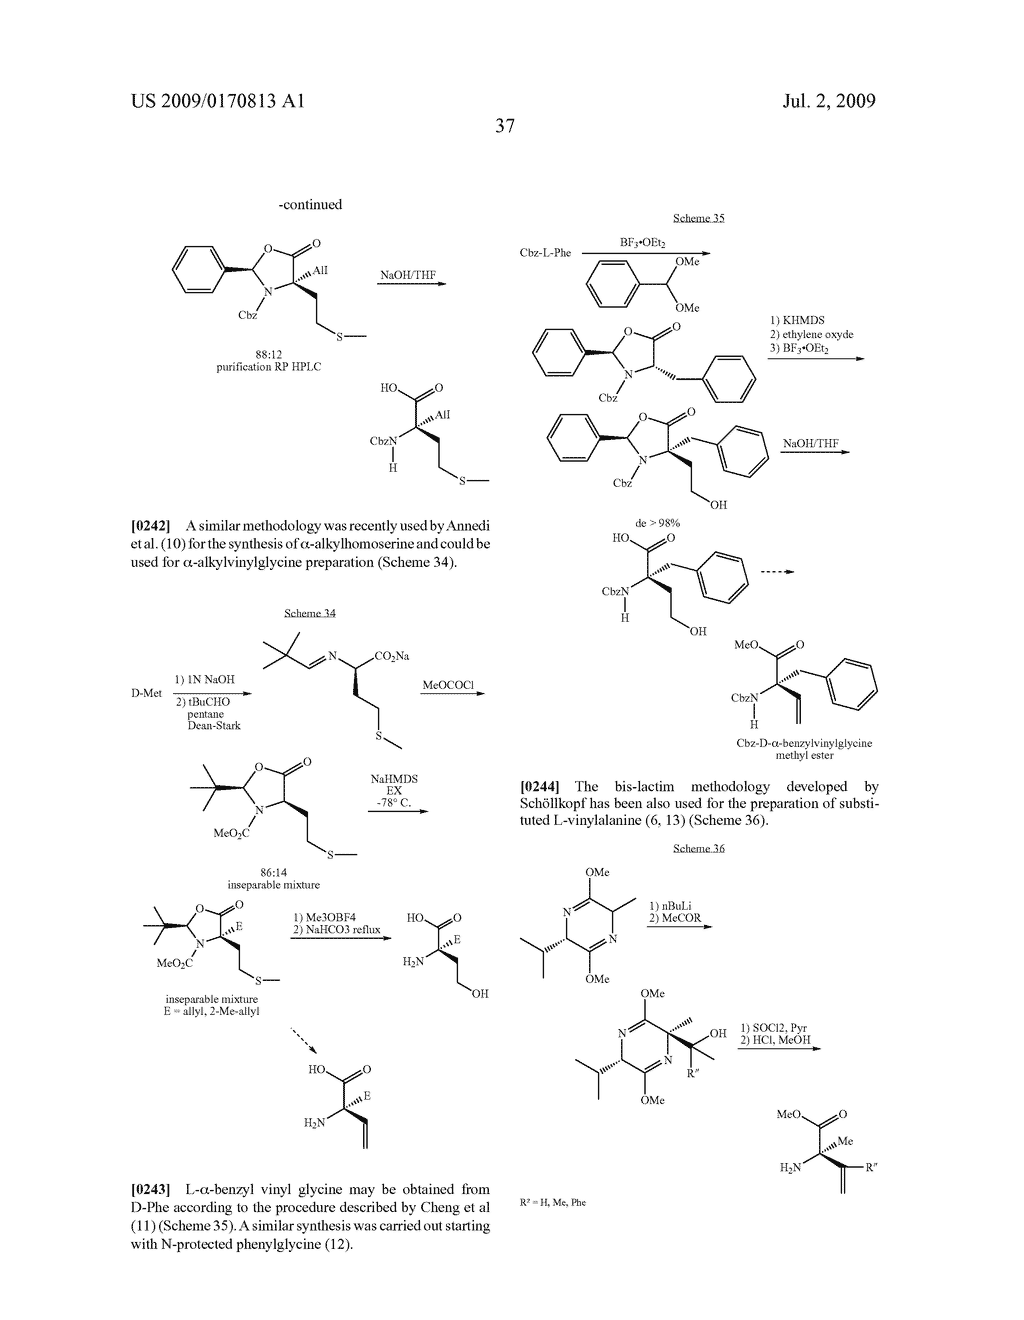 Hypophosphorous Acid Derivatives and their Therapeutical Applications - diagram, schematic, and image 41